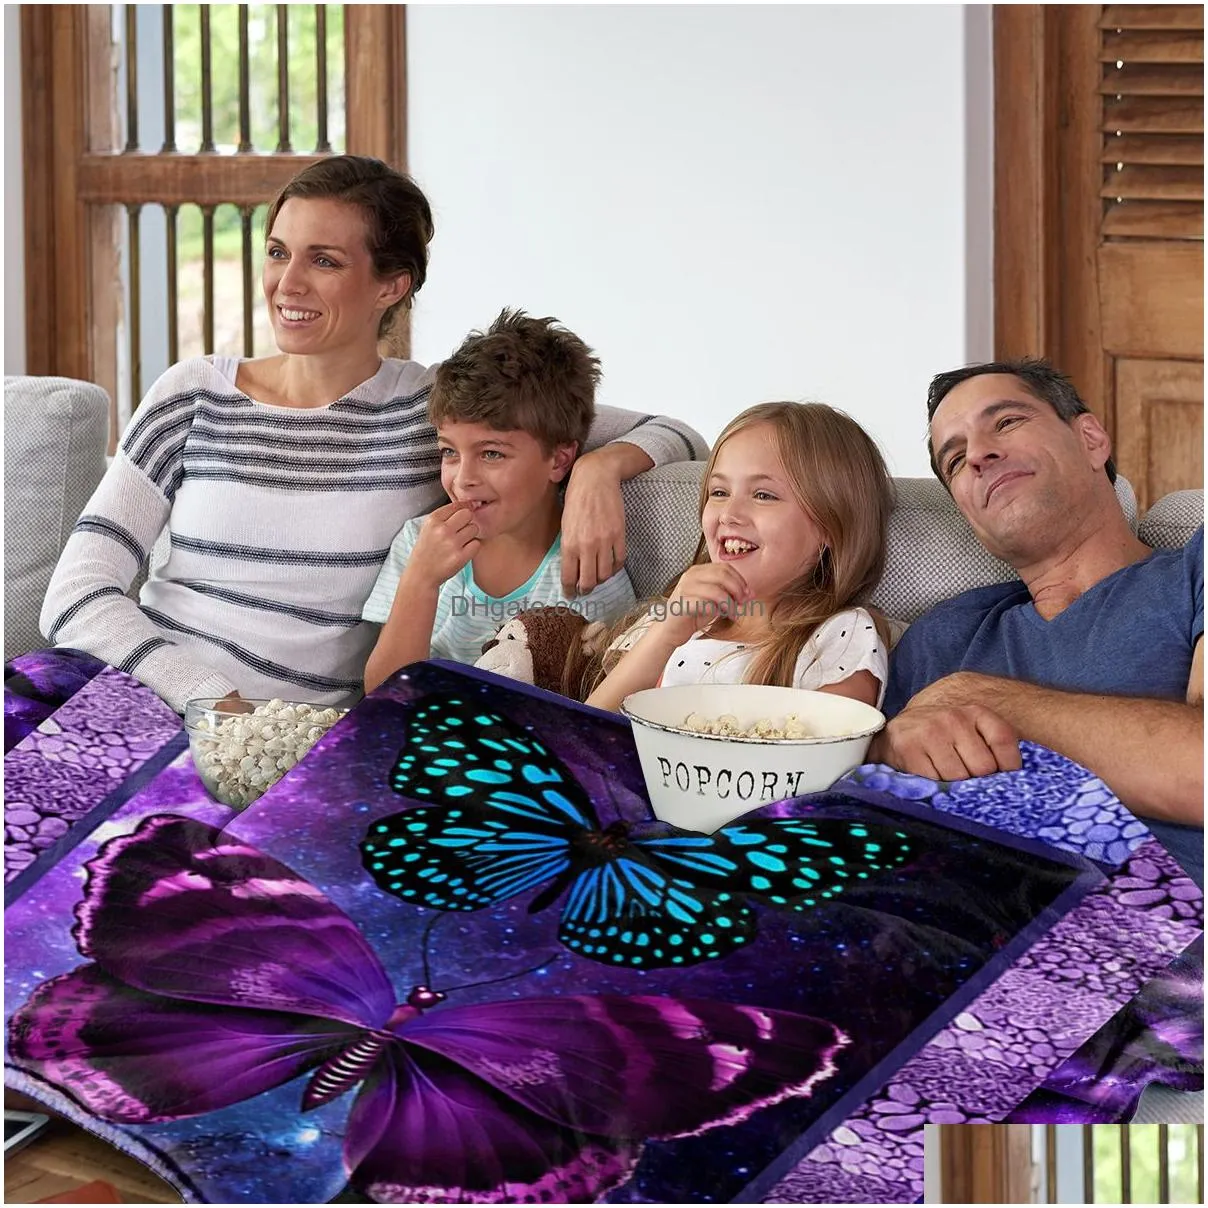 Blankets Butterfly Throw Blanket Purple and Blue Design for Kids Adults Cozy Couch Sofa Bed Living Room 230923